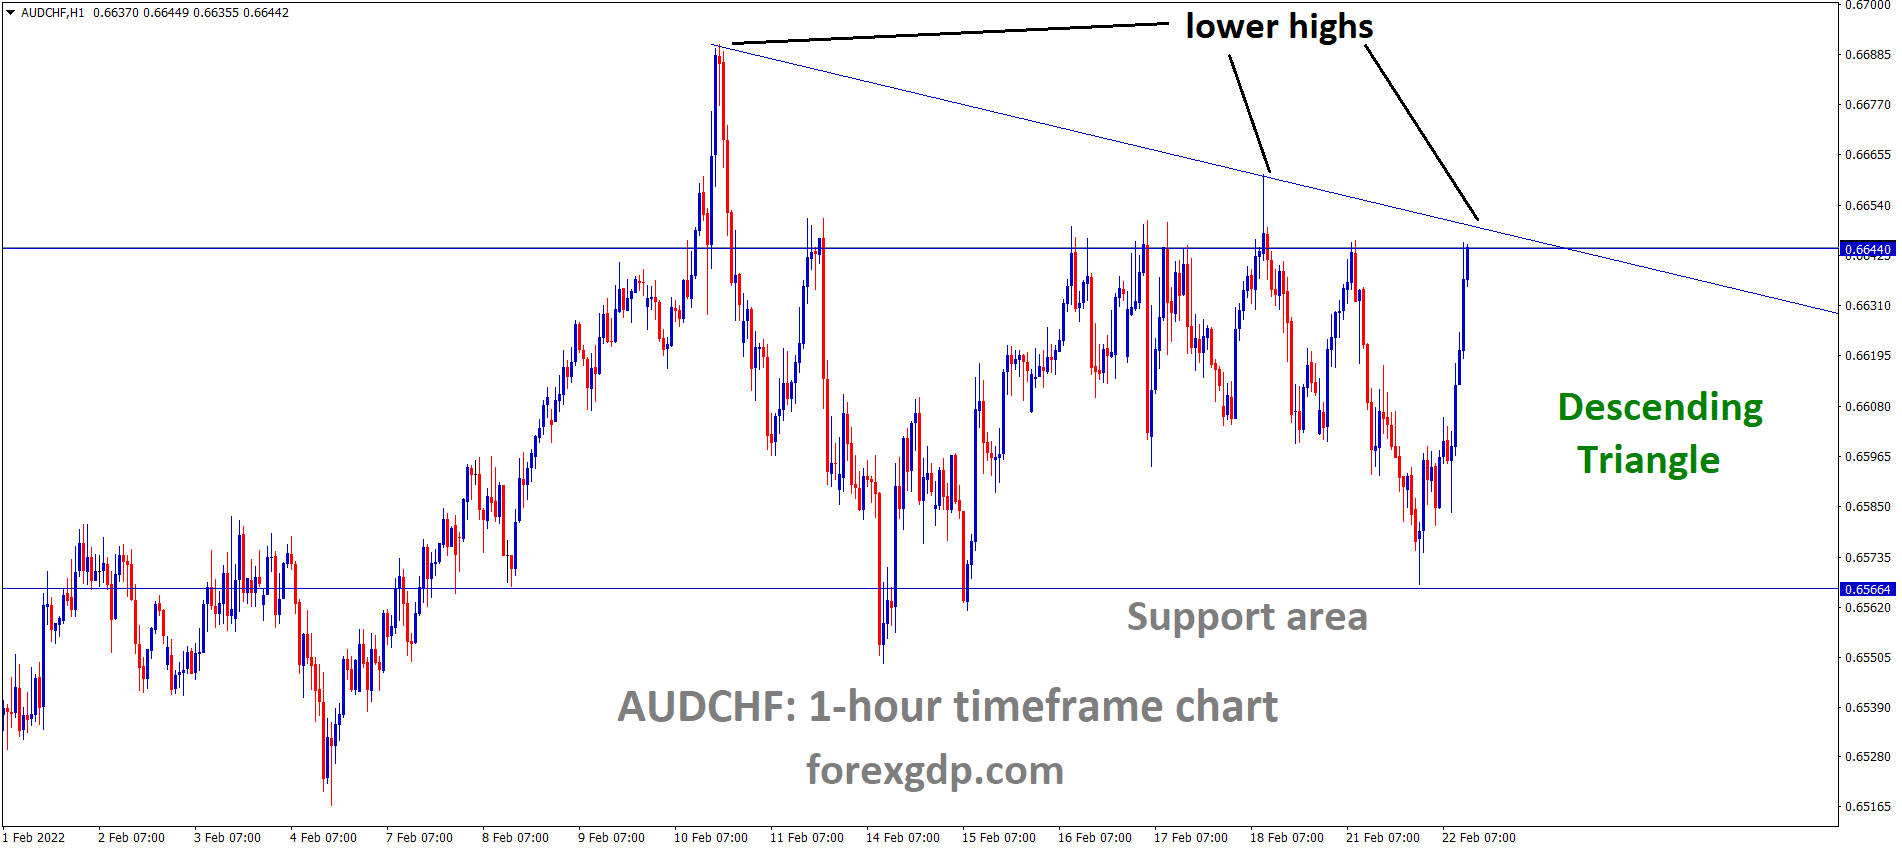 AUDCHF is moving in the Descending triangle pattern and the market has reached the Resistance area of the Triangle pattern.